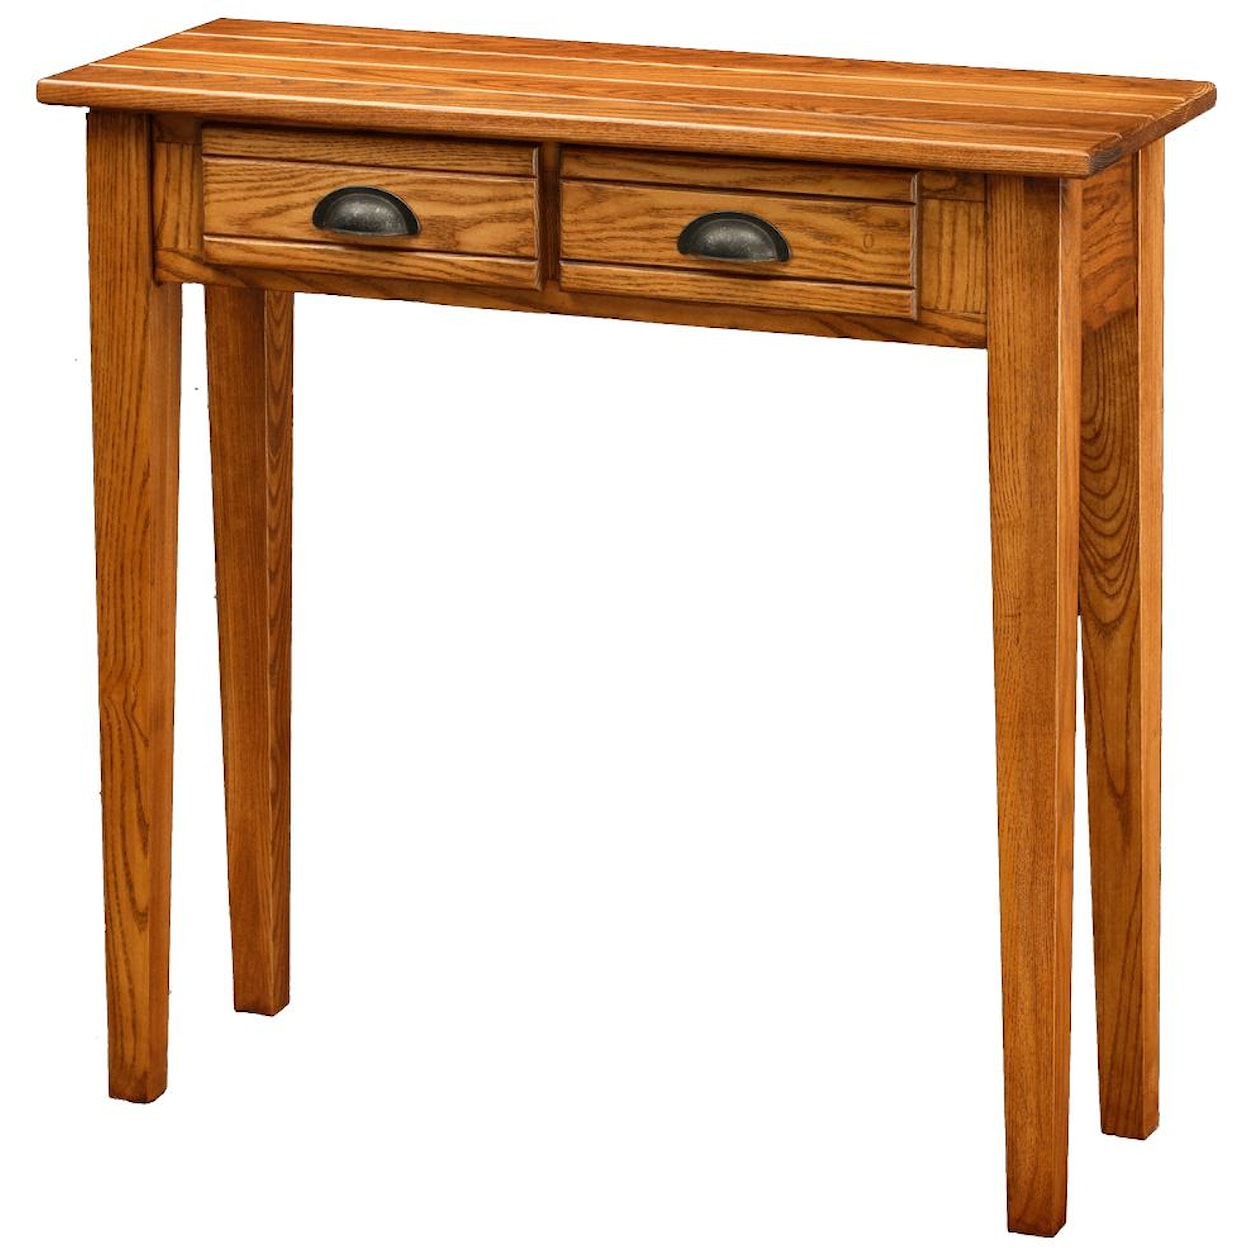 Leick Furniture Favorite Finds 2 Drawer Console Table